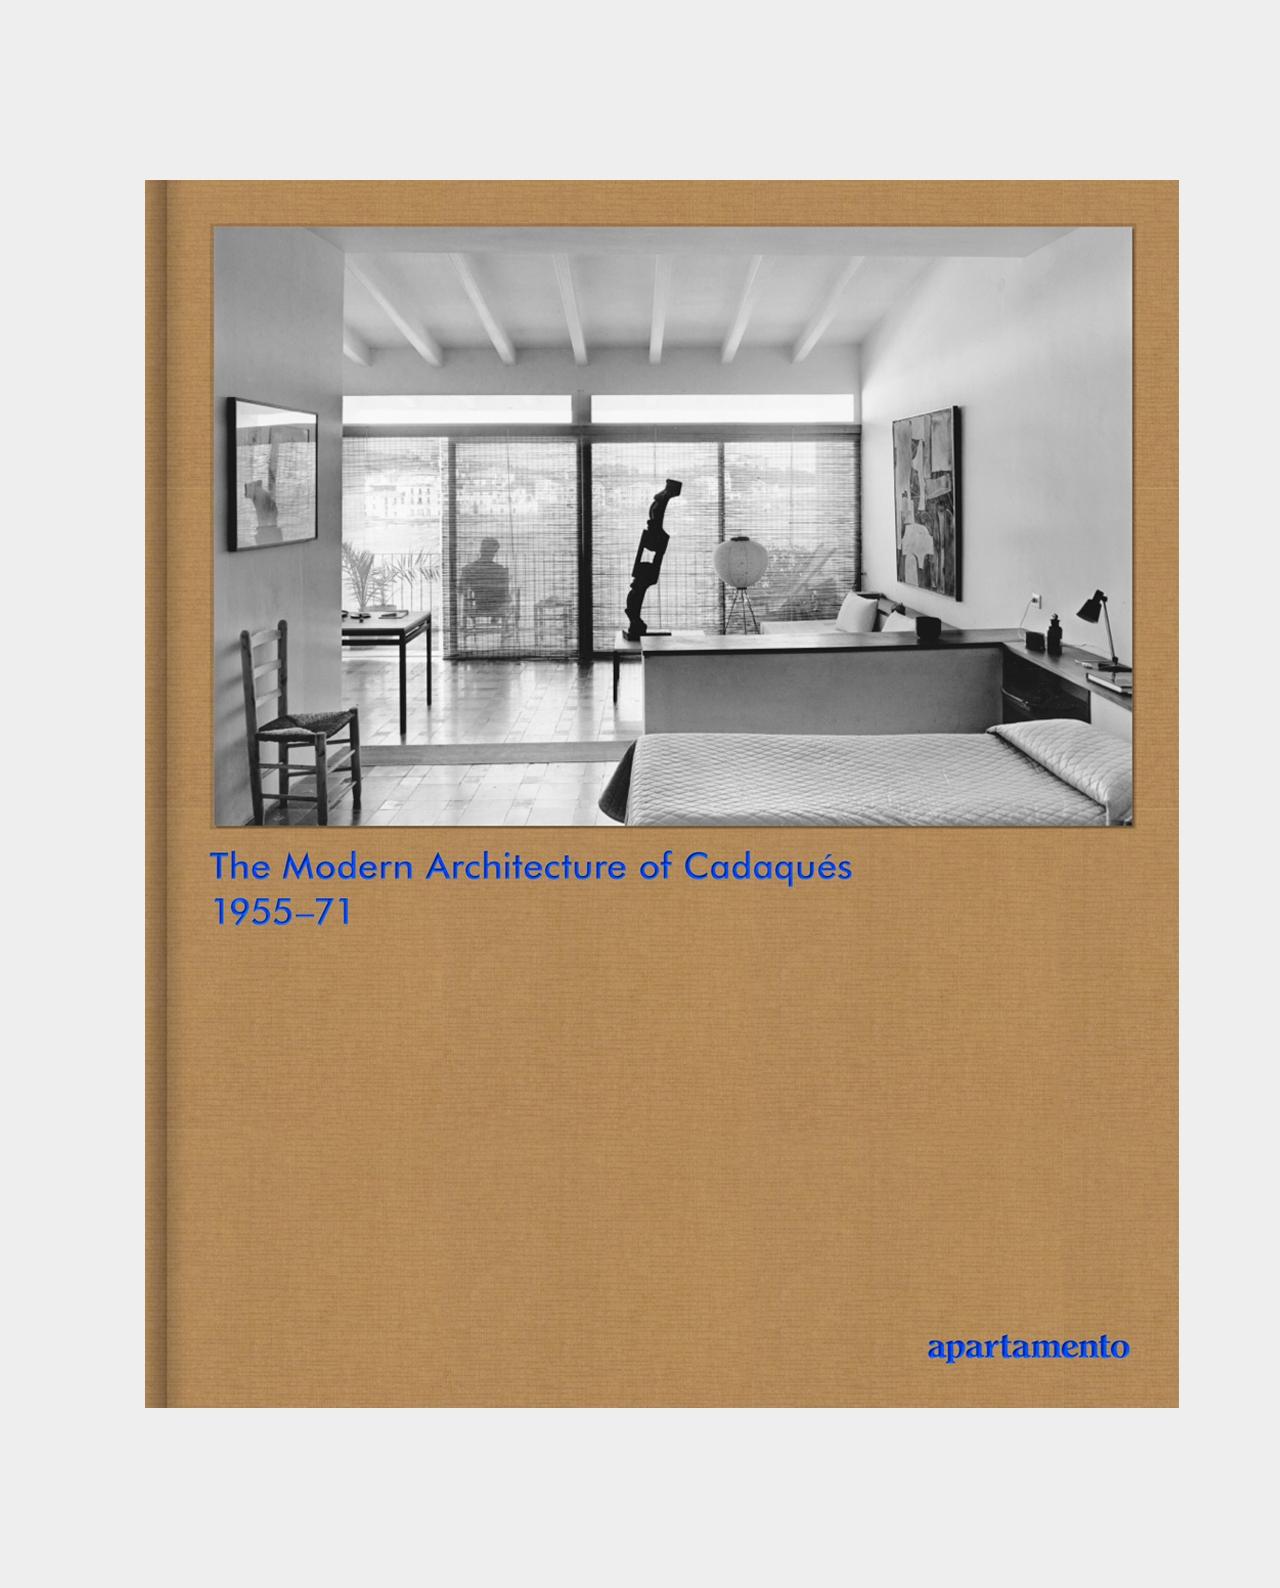 MODERN ARCHITECTURE OF CADAQUES, THE: 1955-71